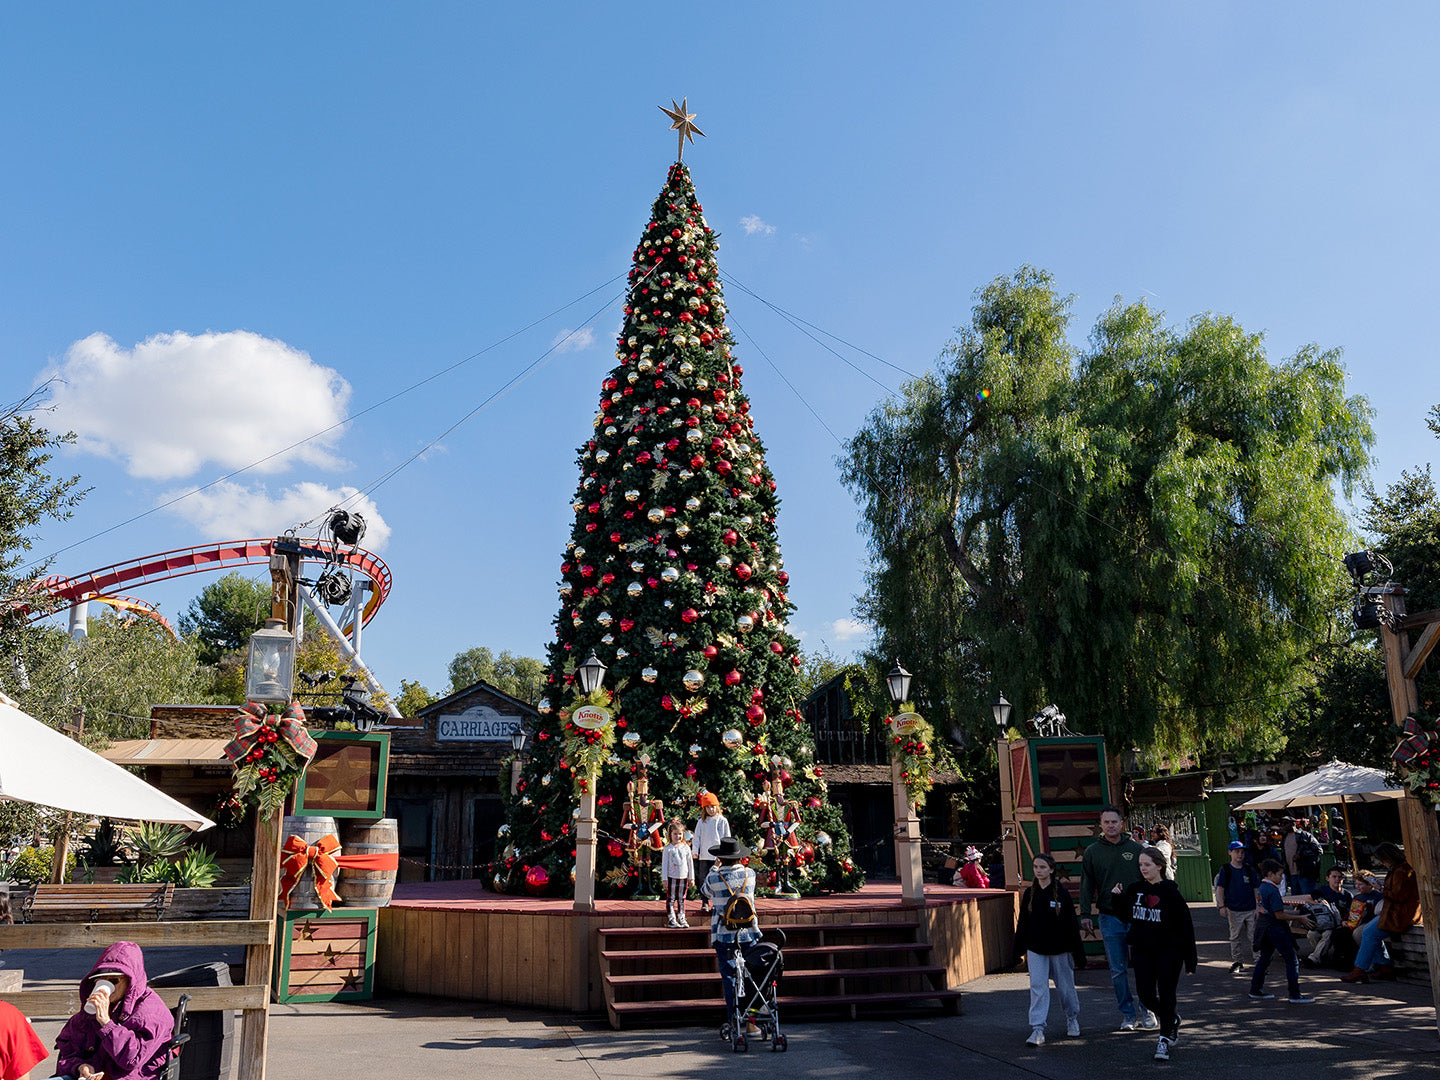 Festive fun takes center stage under the dazzling Christmas tree at Knotts Merry Farm, where twinkling lights and joyous screams fill the air.